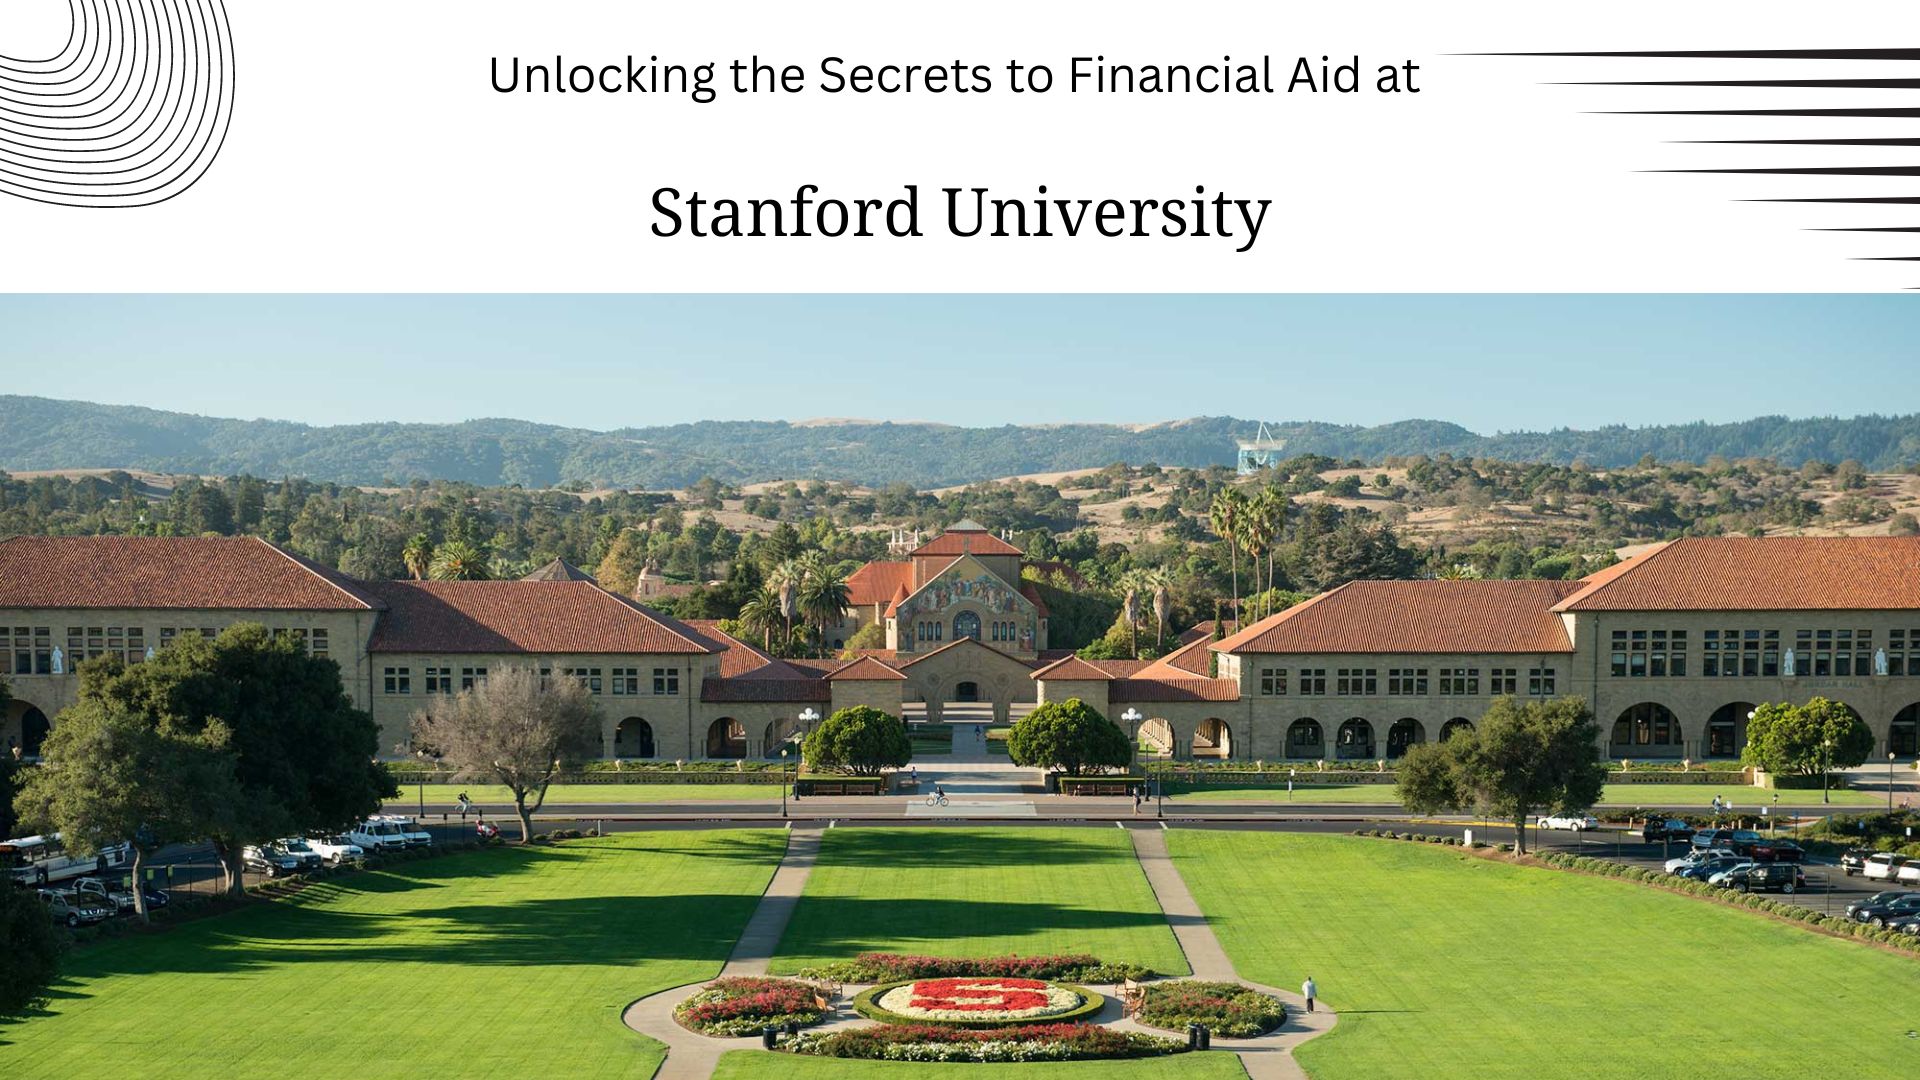 Unlocking the Secrets to Financial Aid at Stanford University